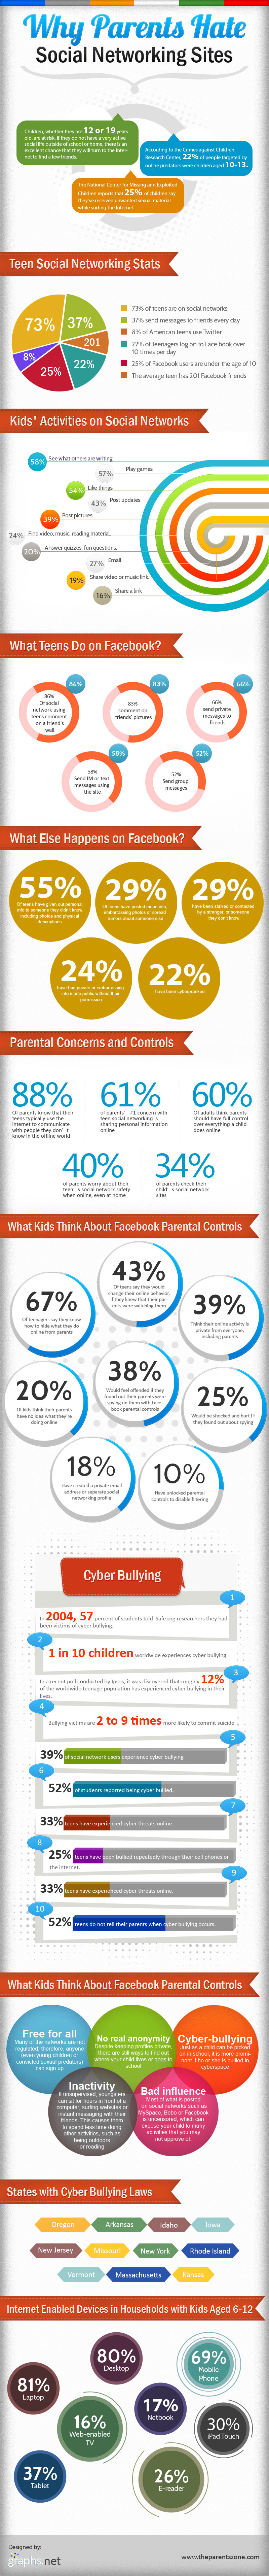 Why Parents Hate Social Networking Sites